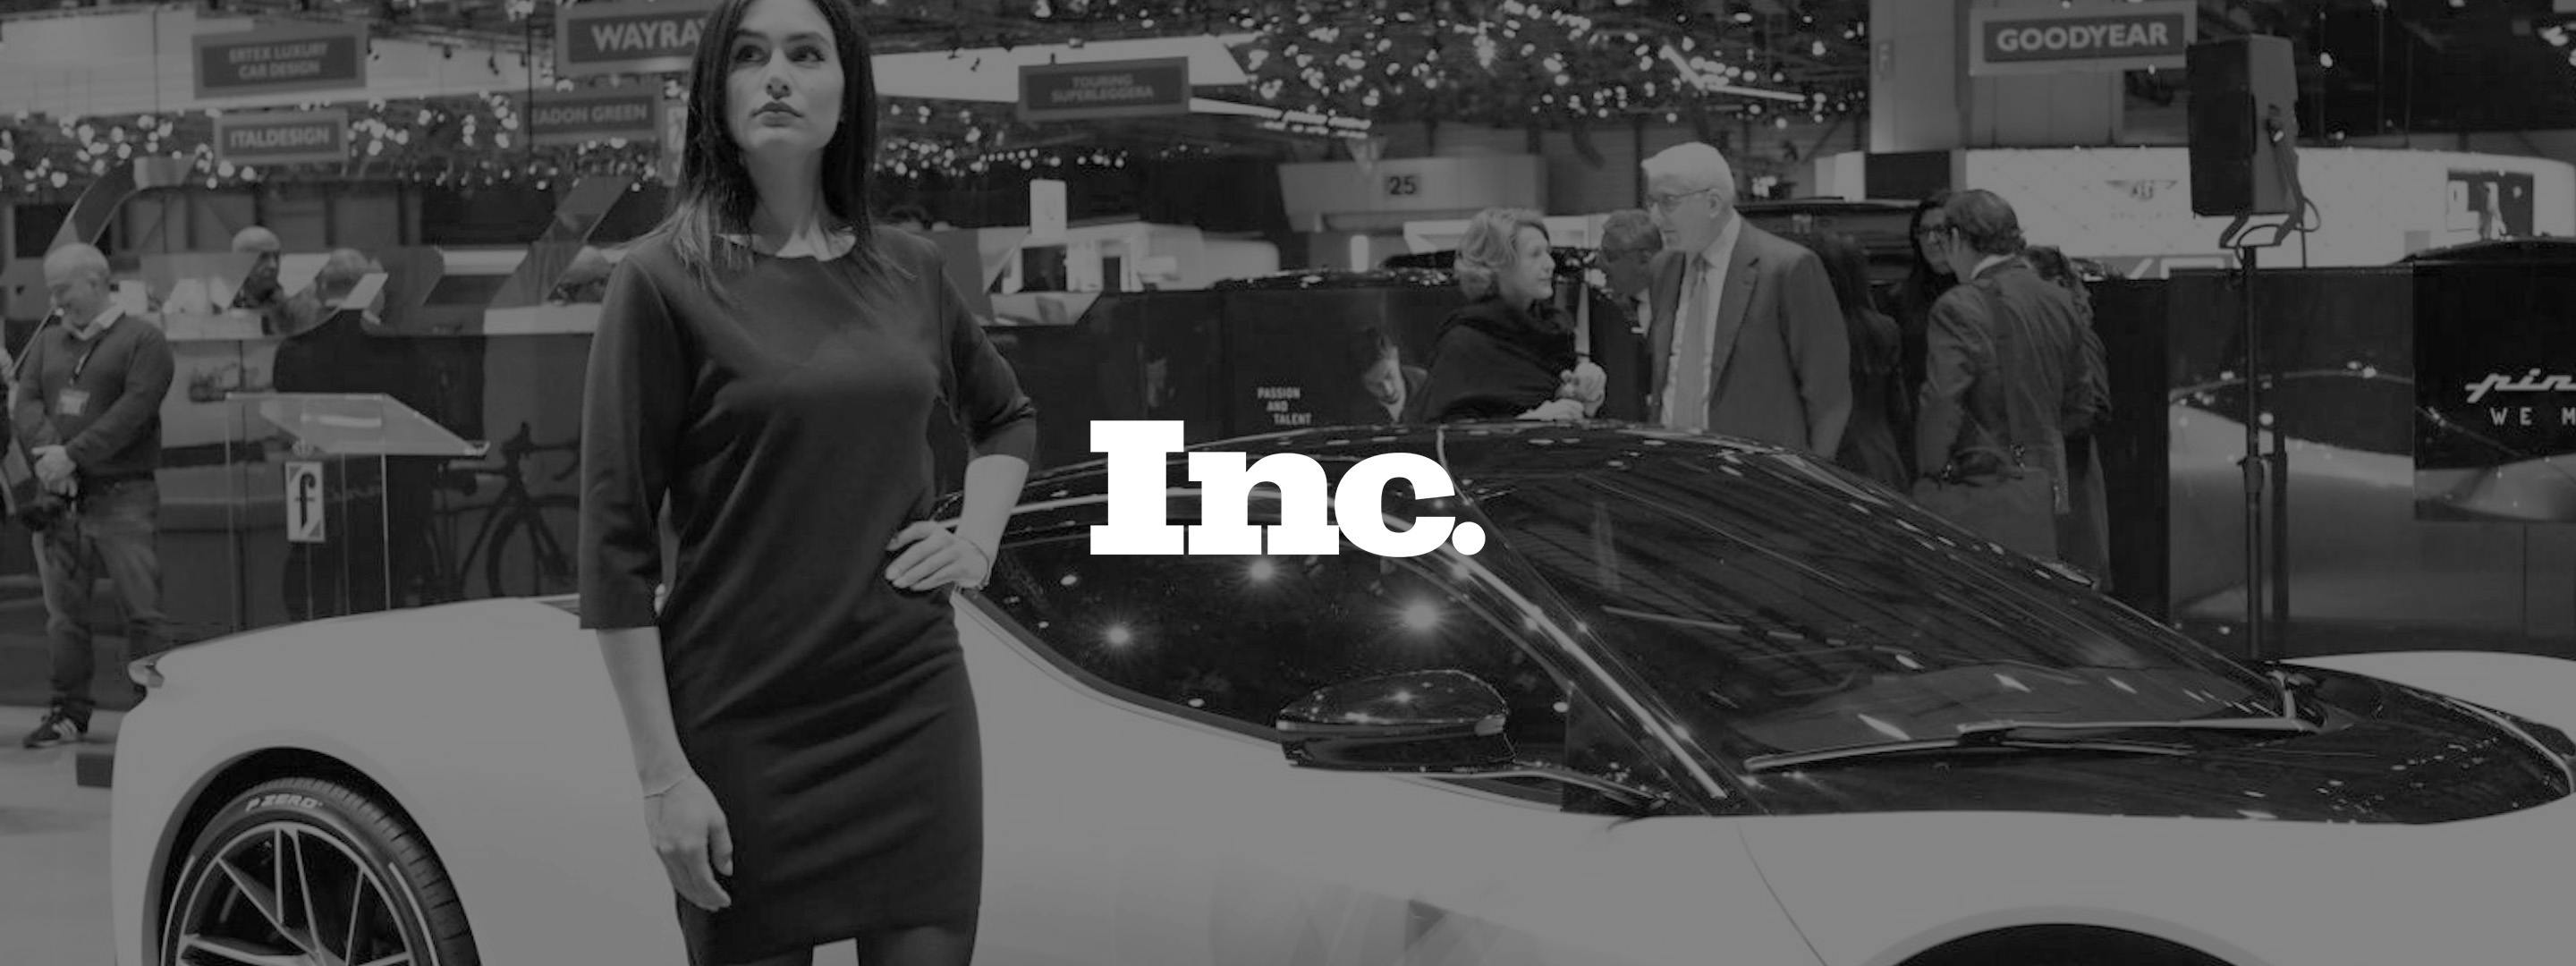 Black and white image of a woman posing next to a concept car with people in the background chatting.